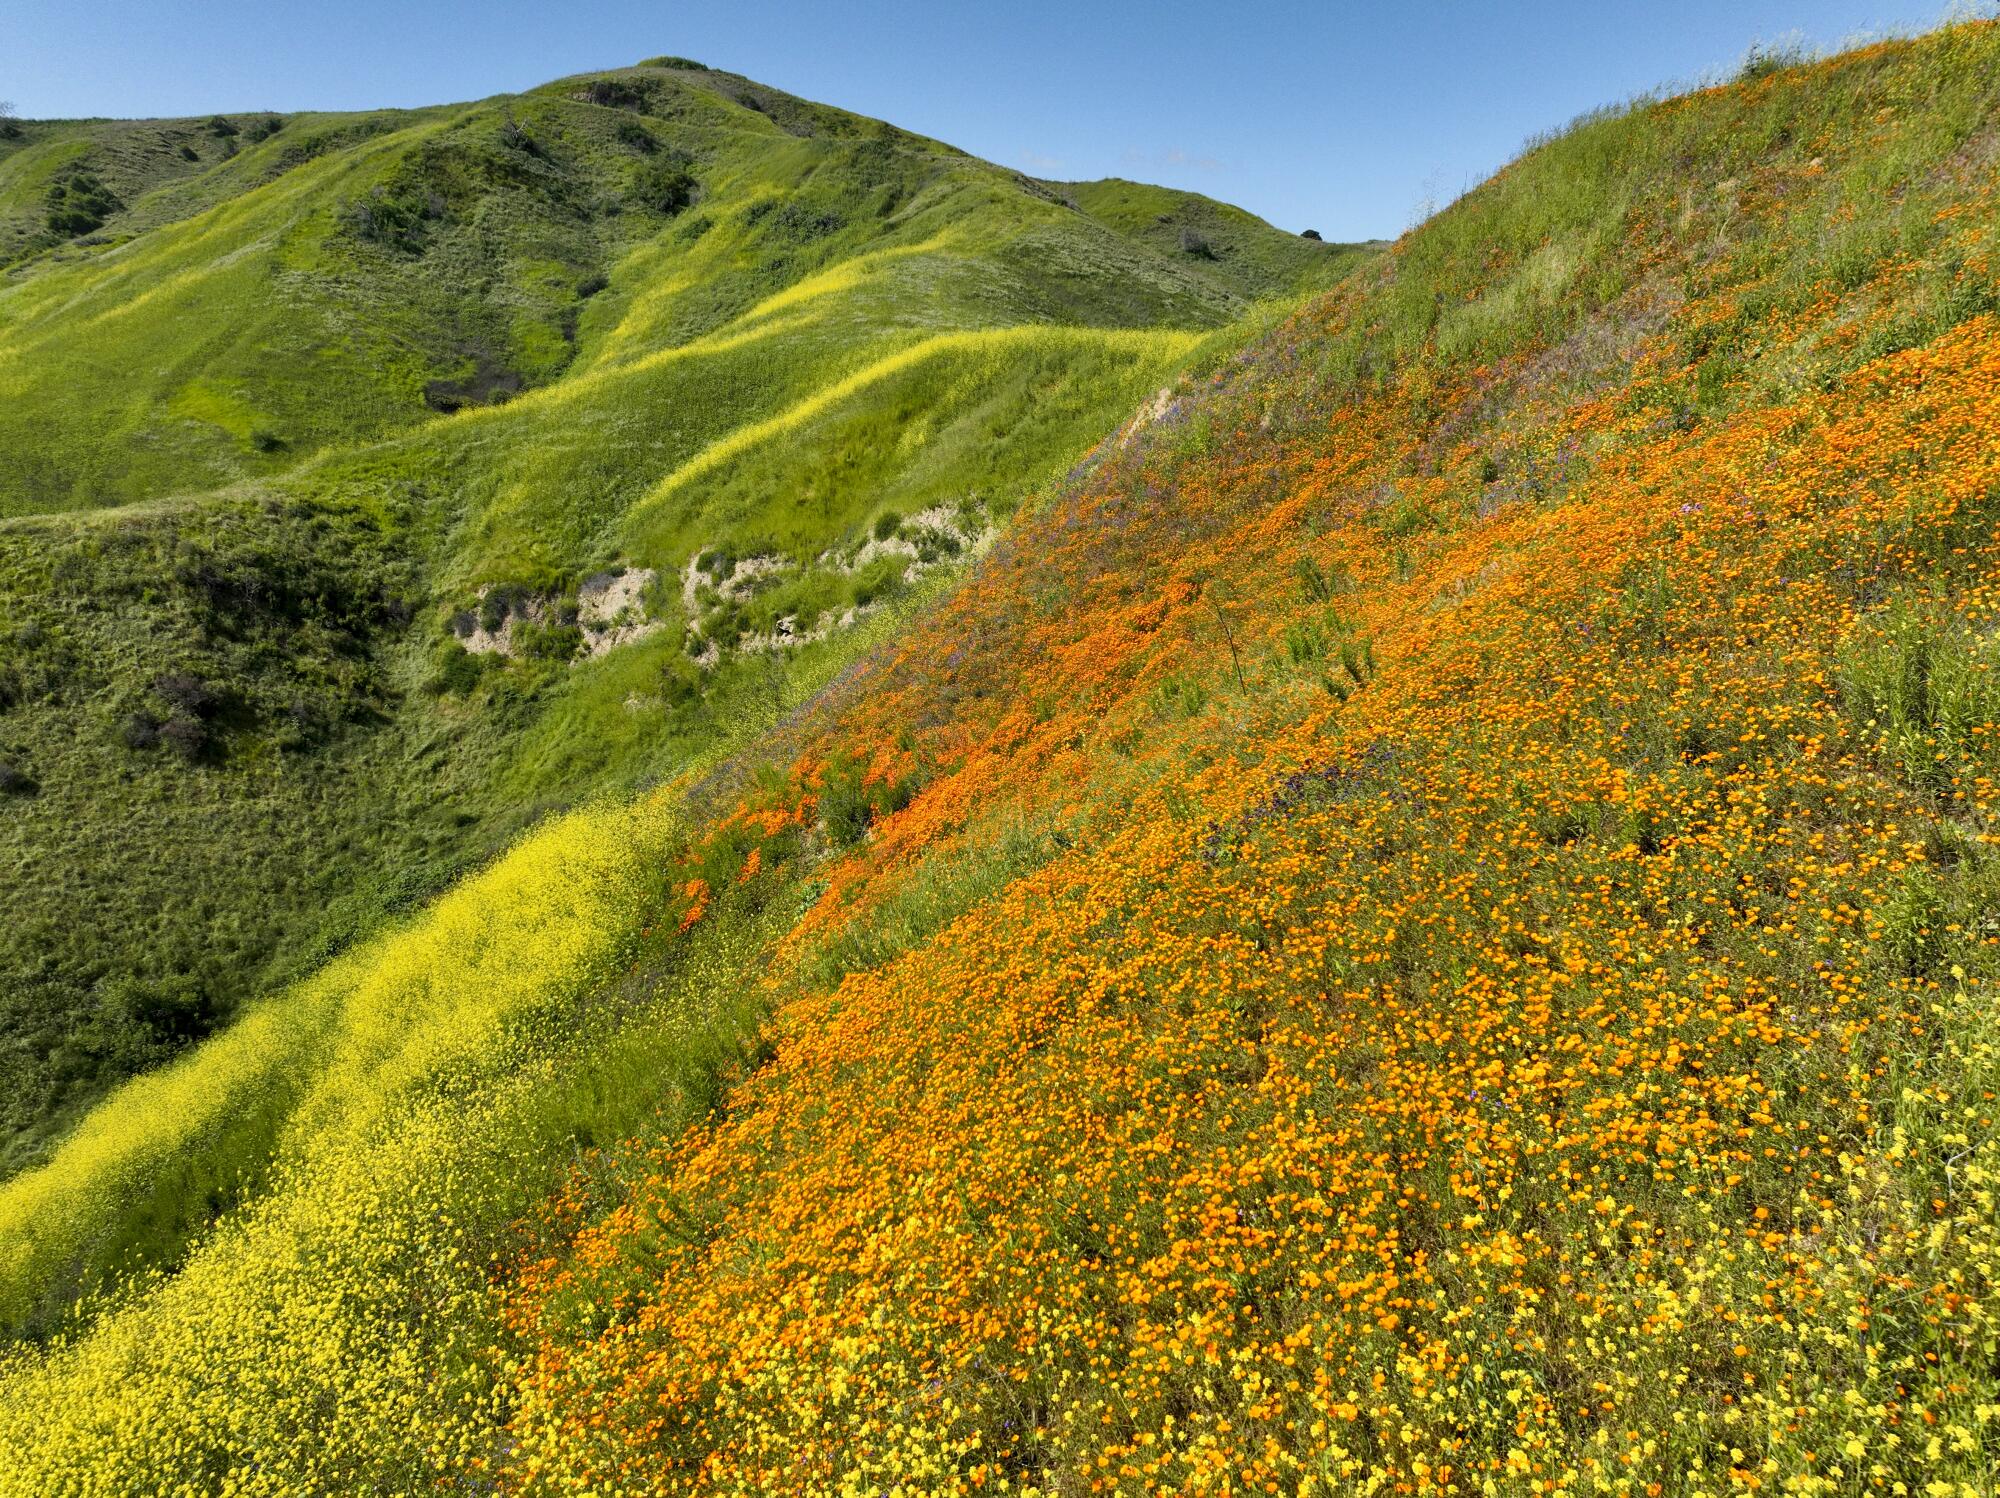 A hilly meadow is in full bloom covered in yellow and orange flowers over lush green grasses.